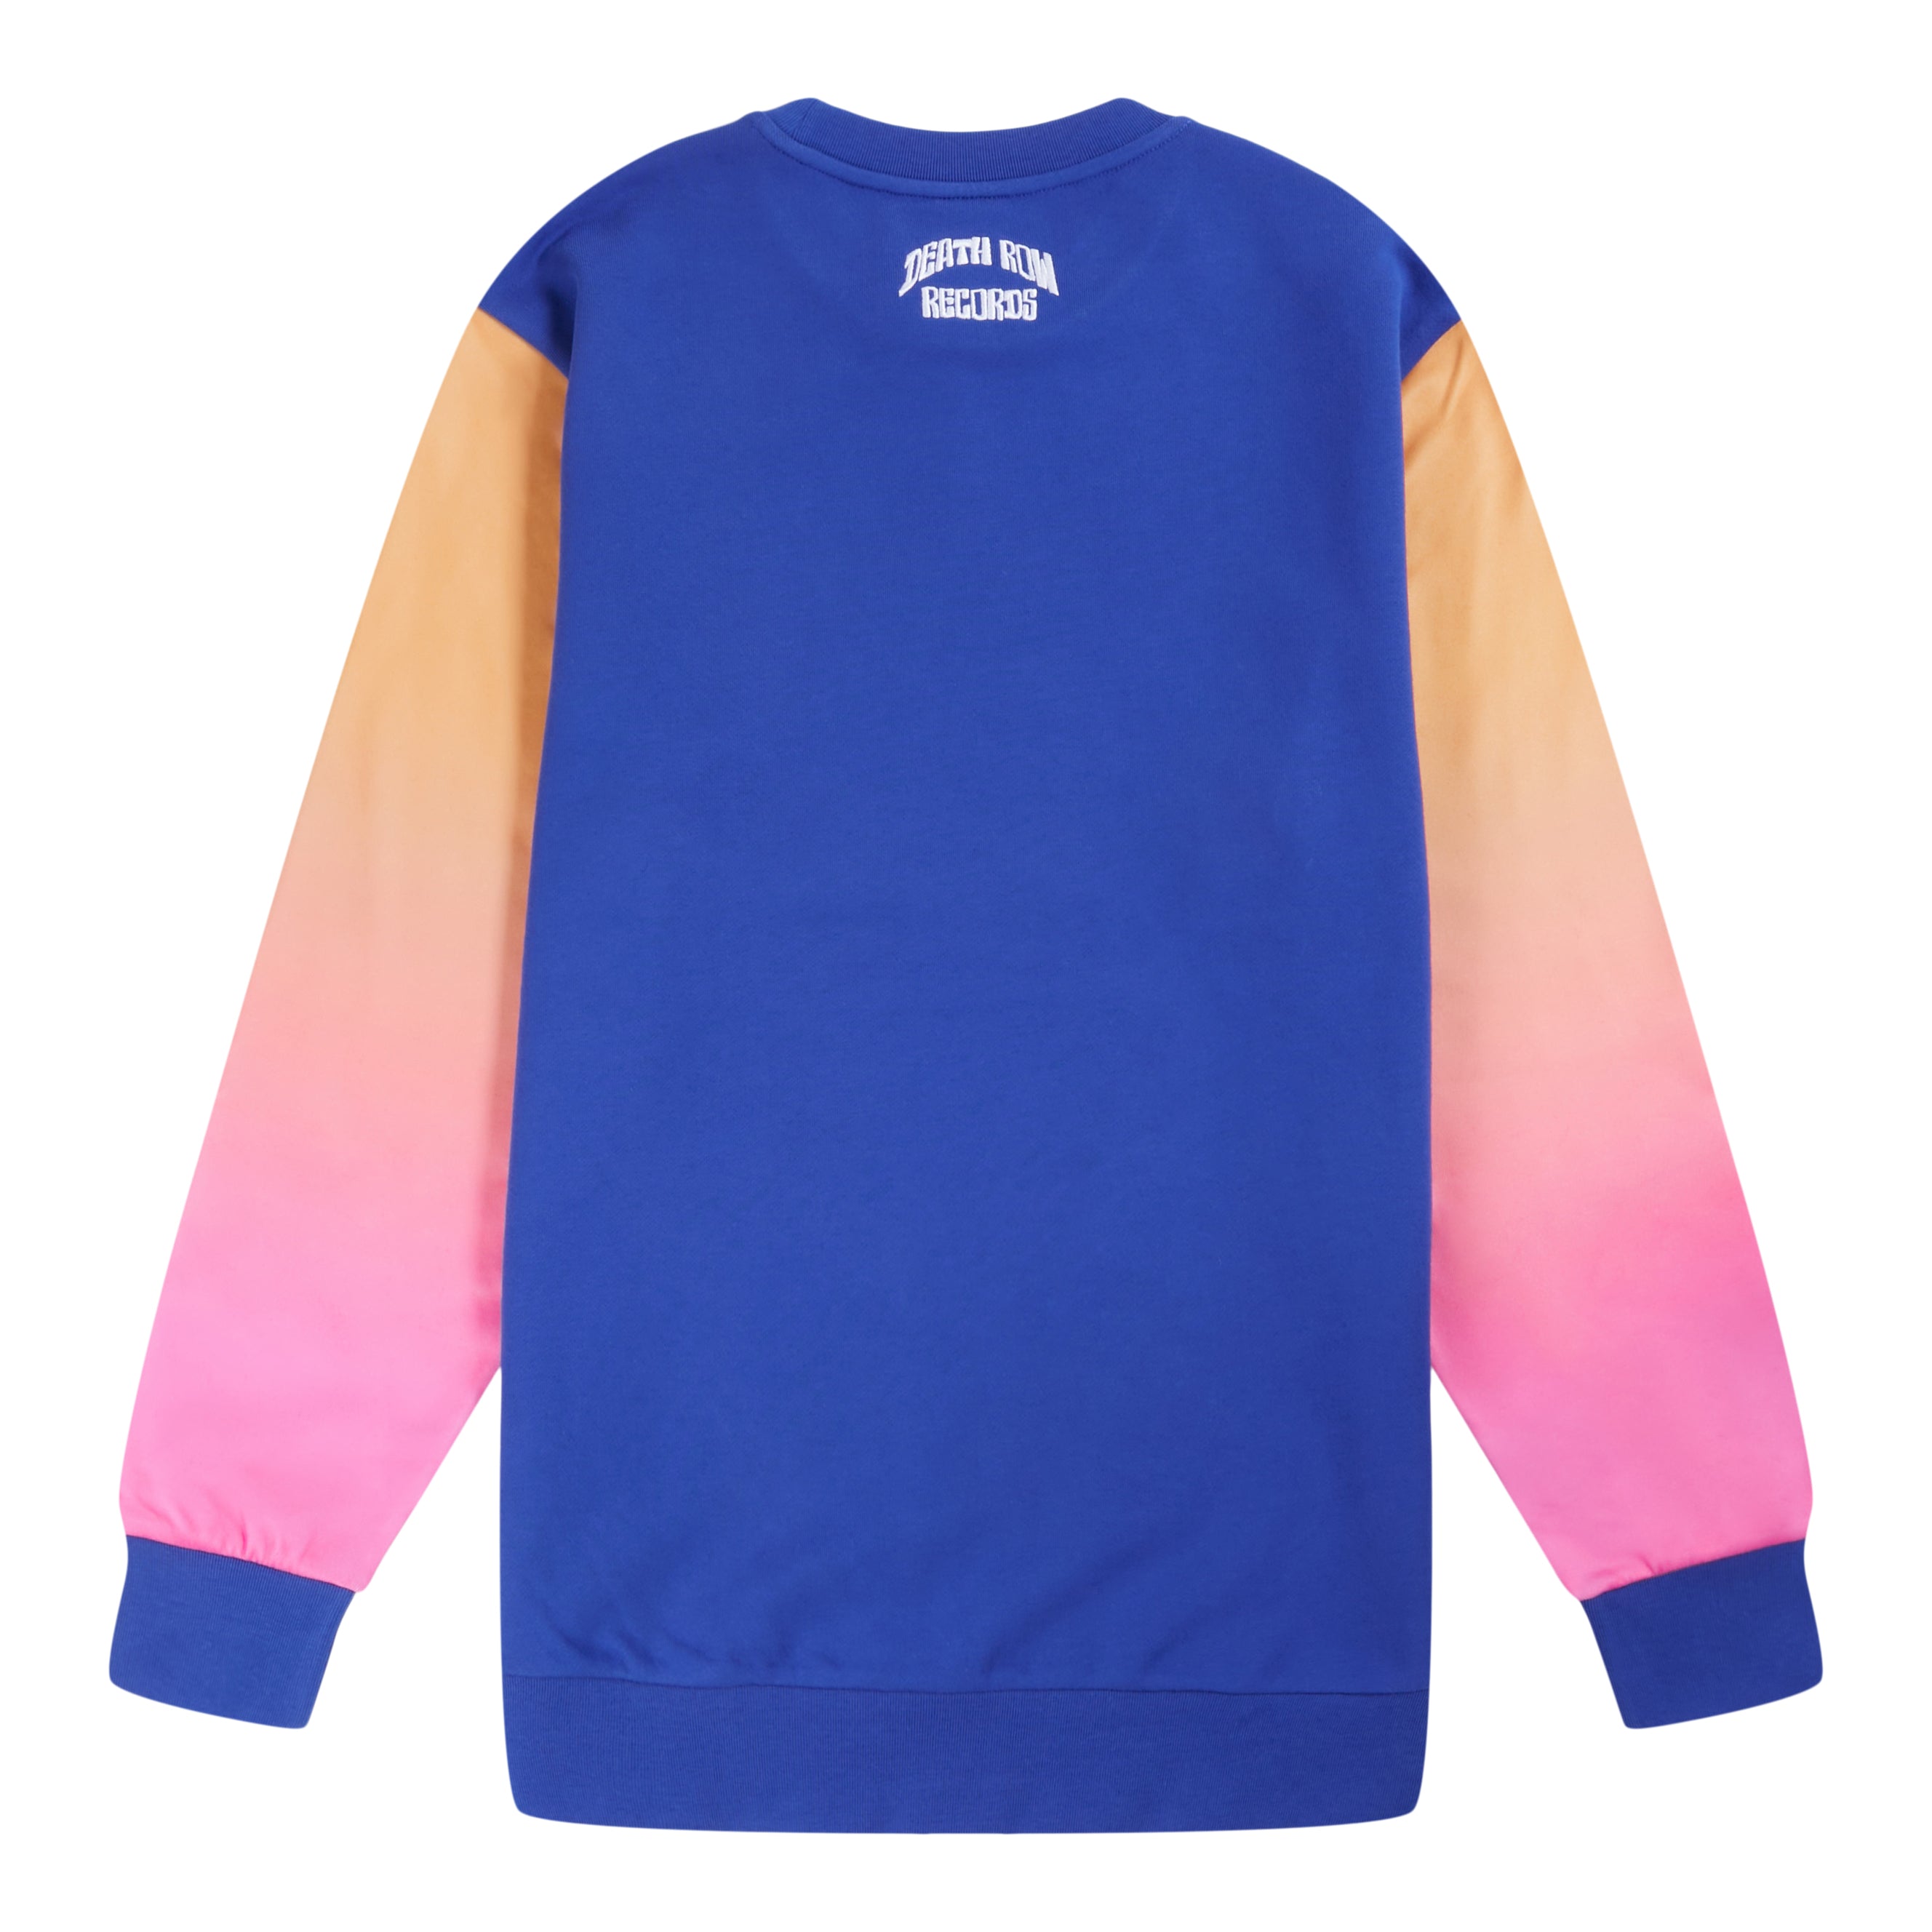 Dr Bombay Embroidered Sunset Crew